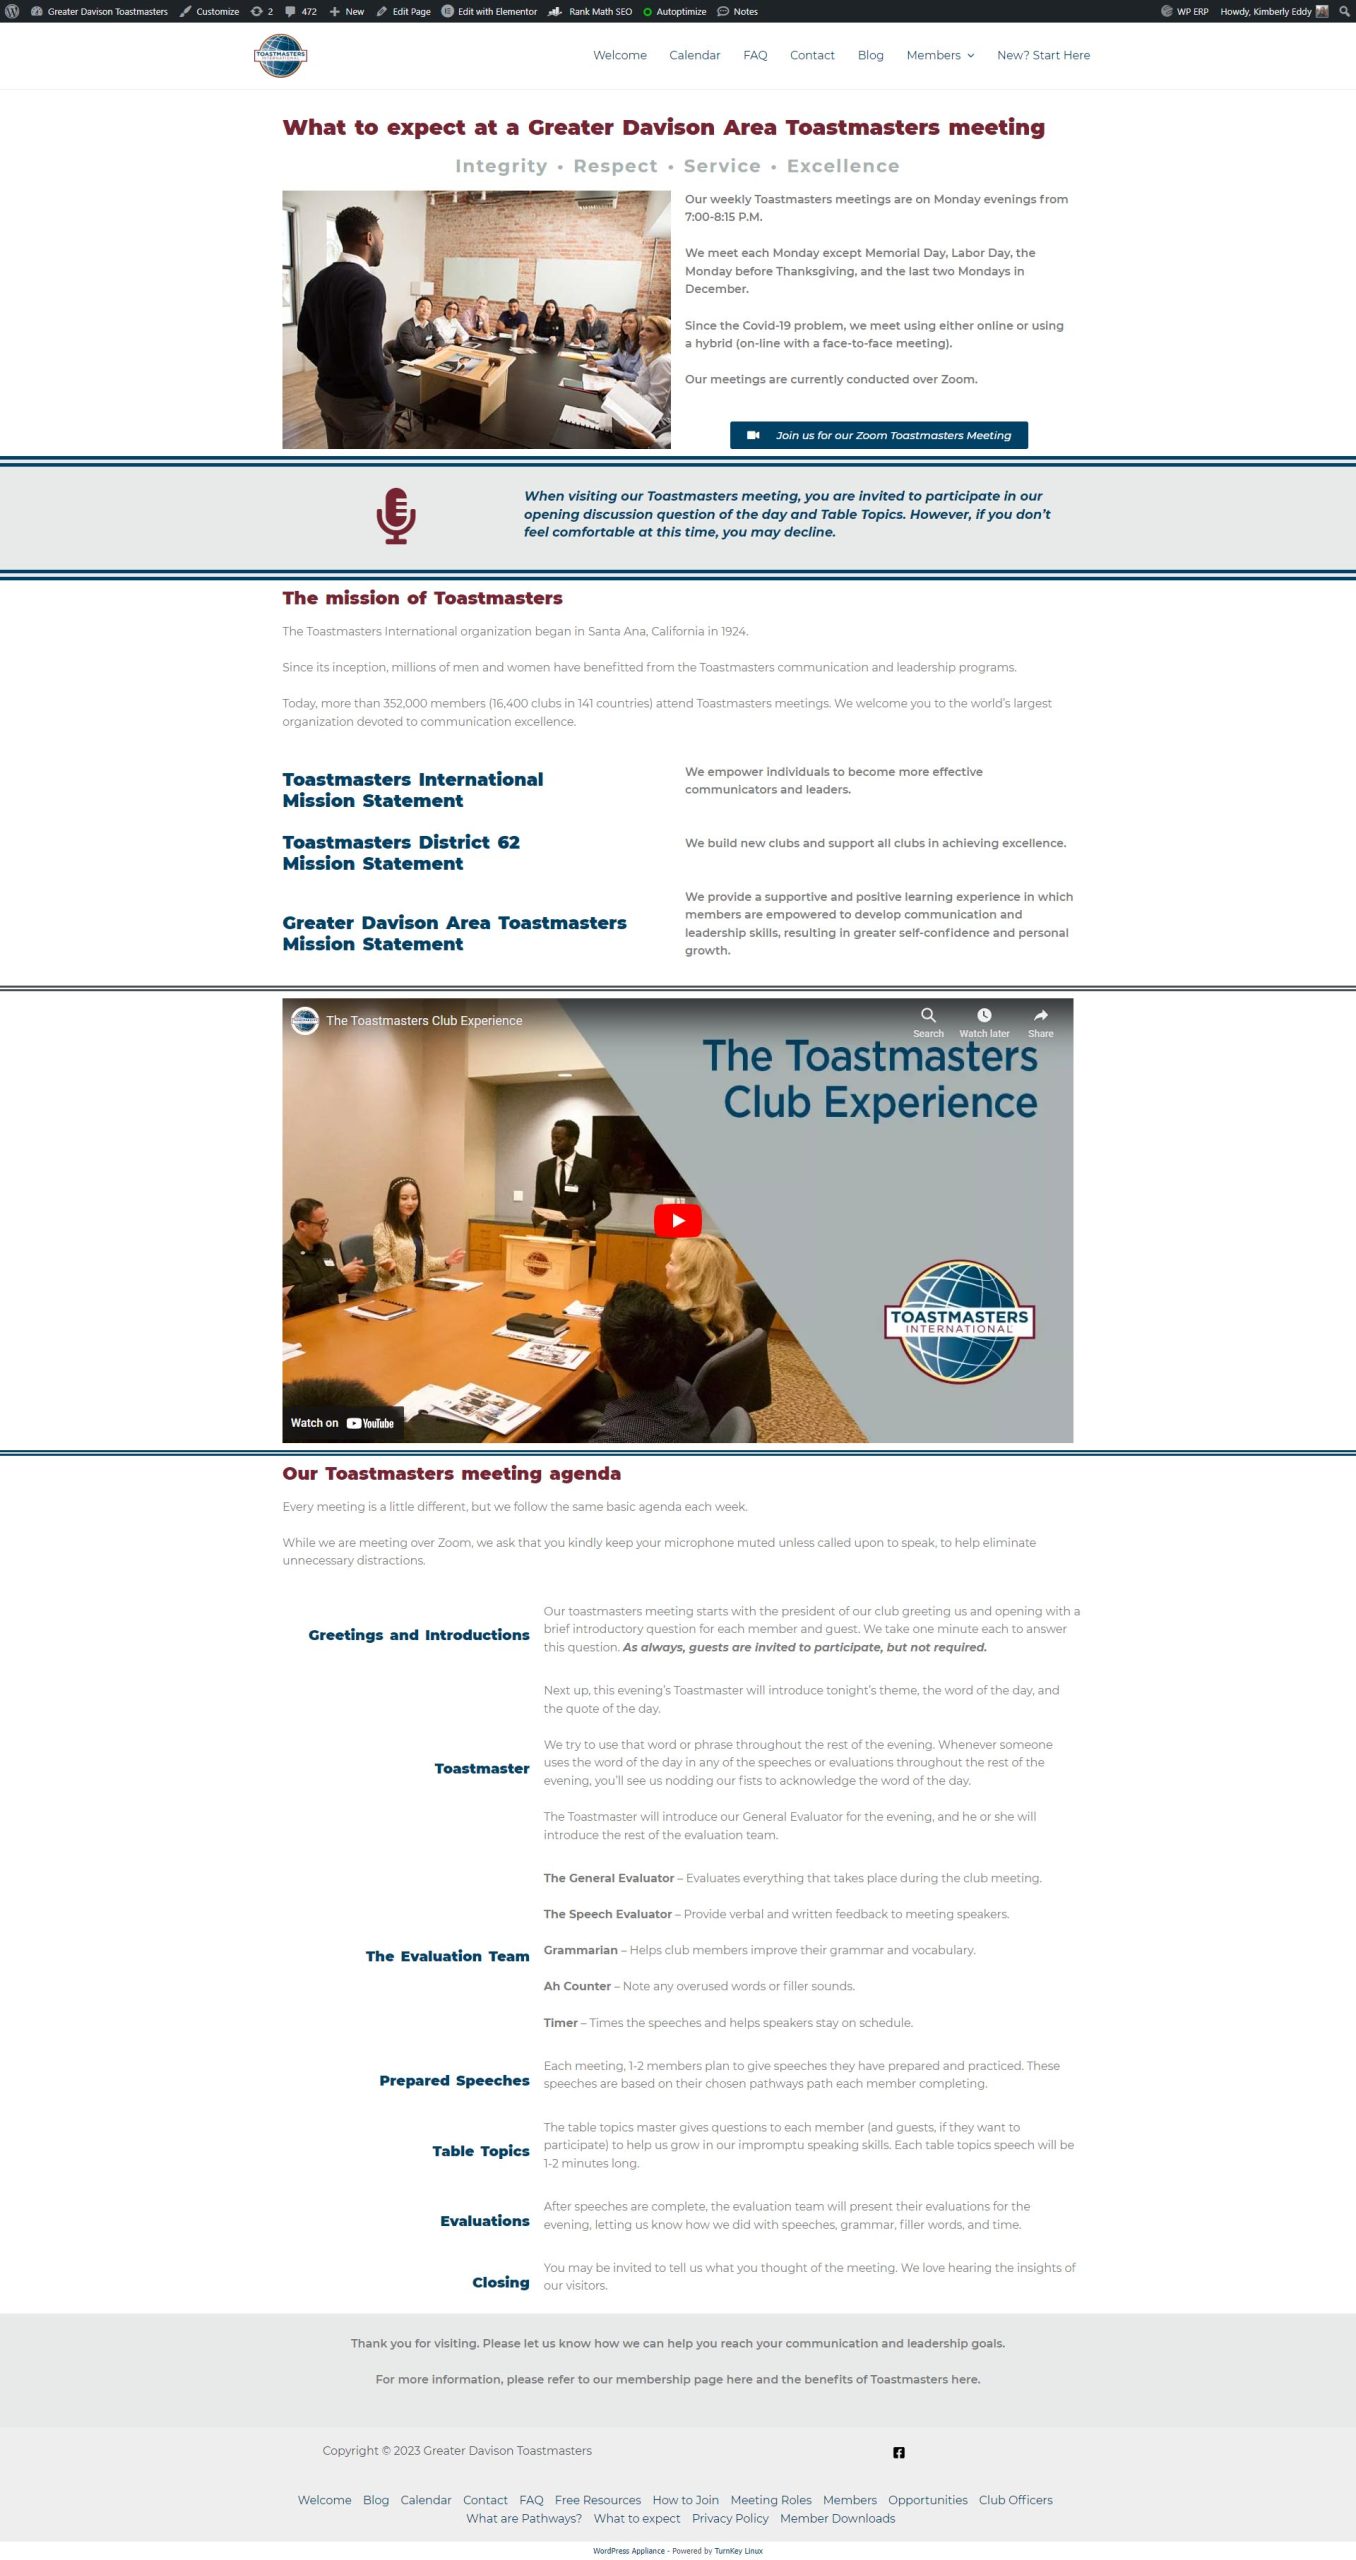 Sample optimized website page for a club Toastmasters website, showing how layout can help content be more easily digested